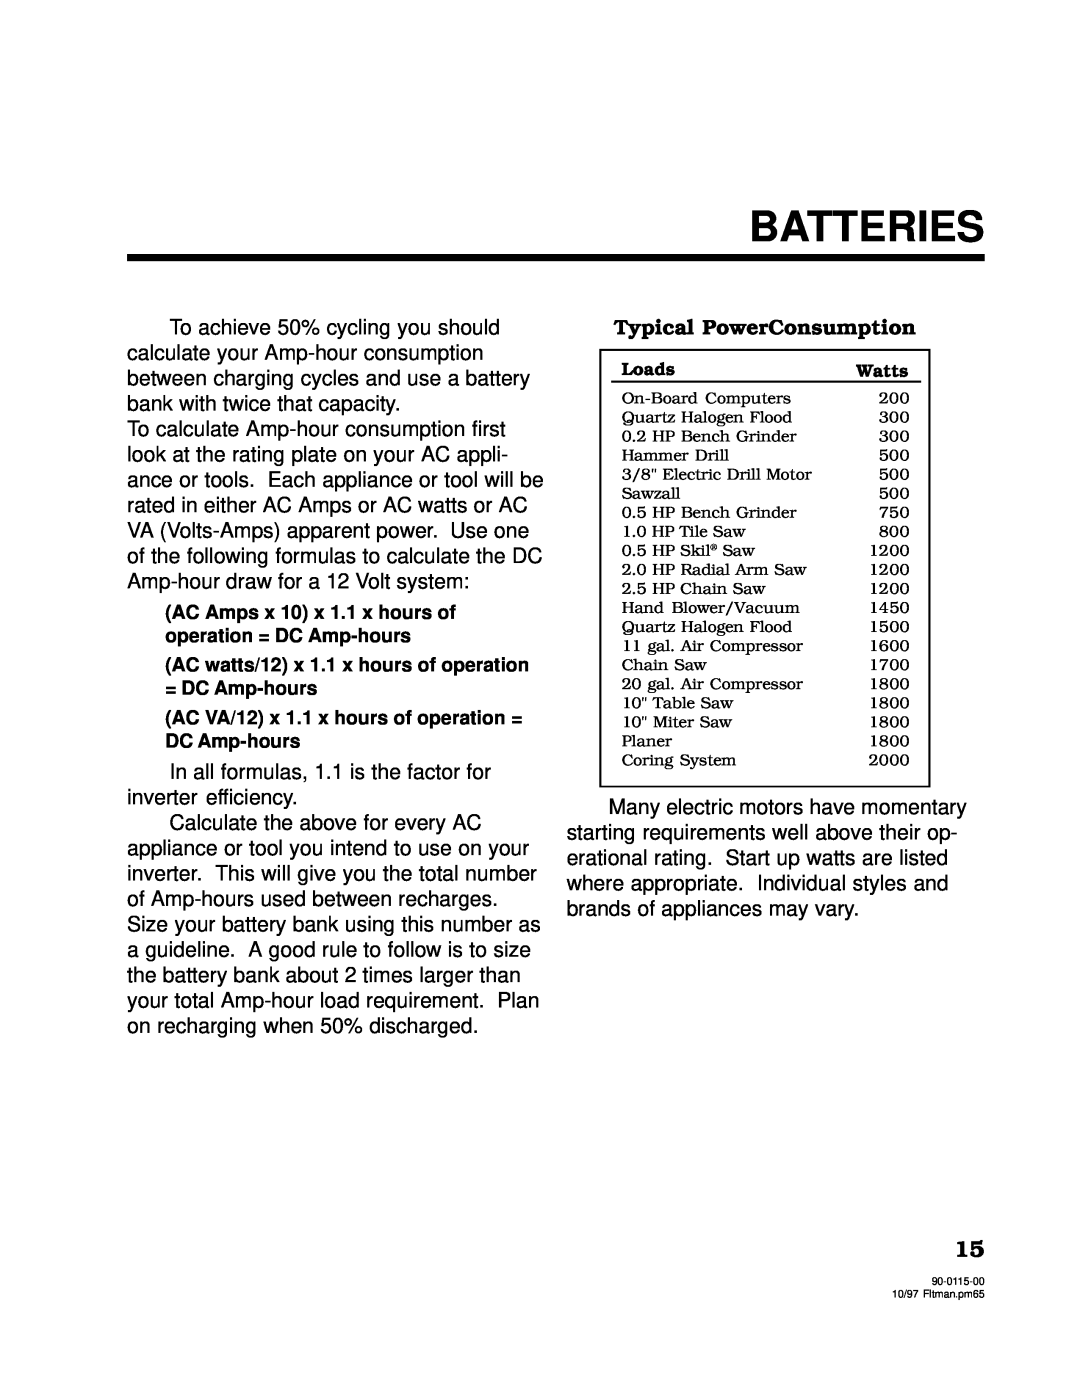 Xantrex Technology 2000, 2500 owner manual Typical PowerConsumption, Batteries, Loads, Watts 